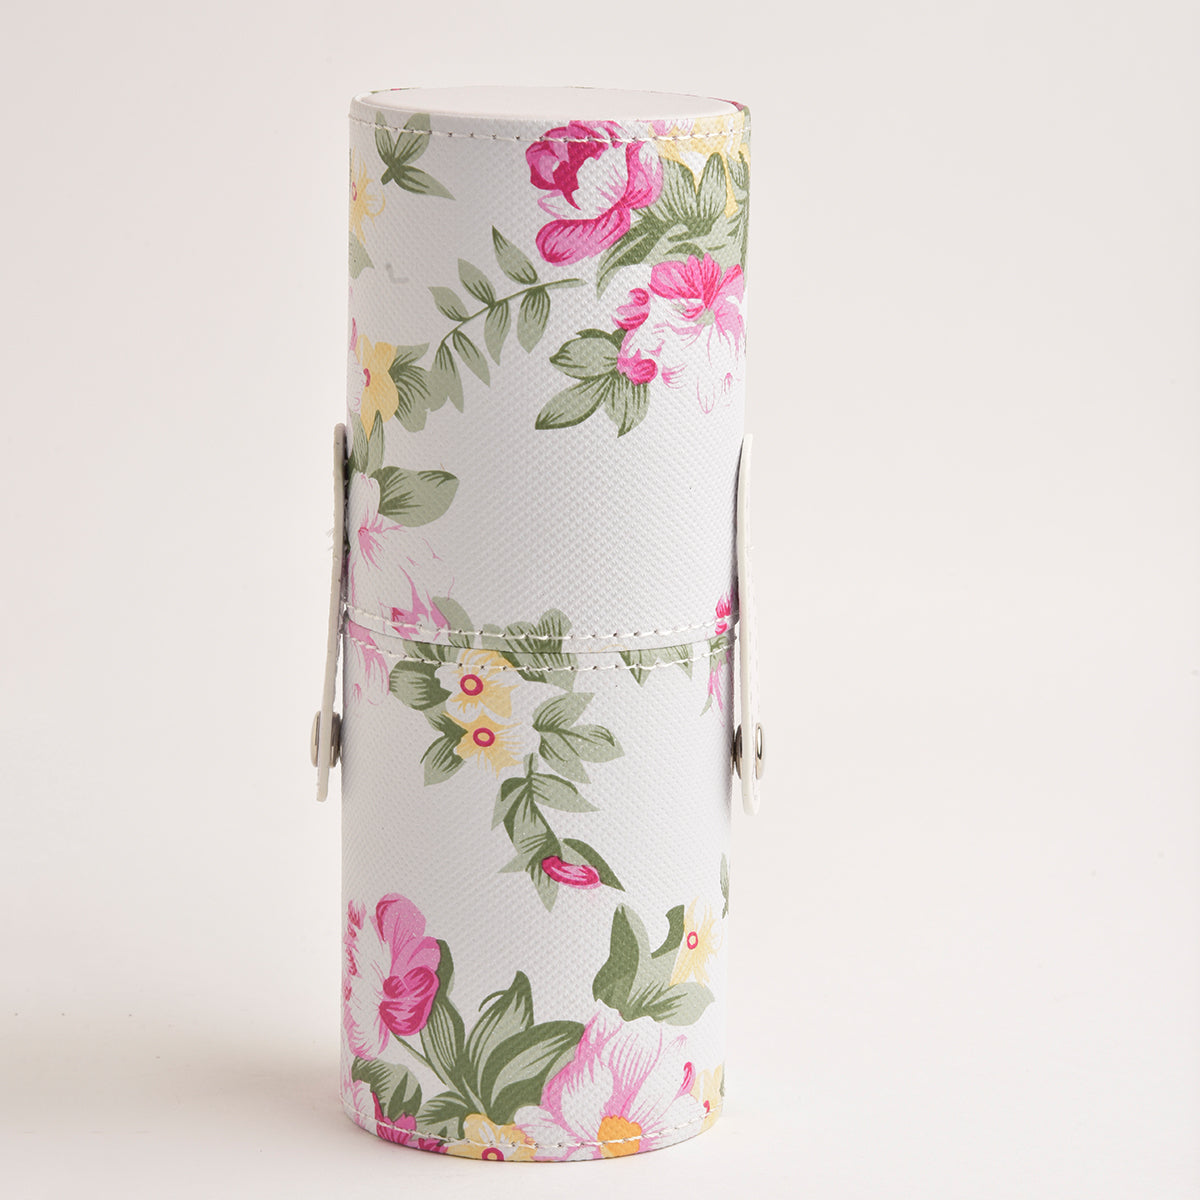 Leather Cosmetics Storage Case - Floral tubby case